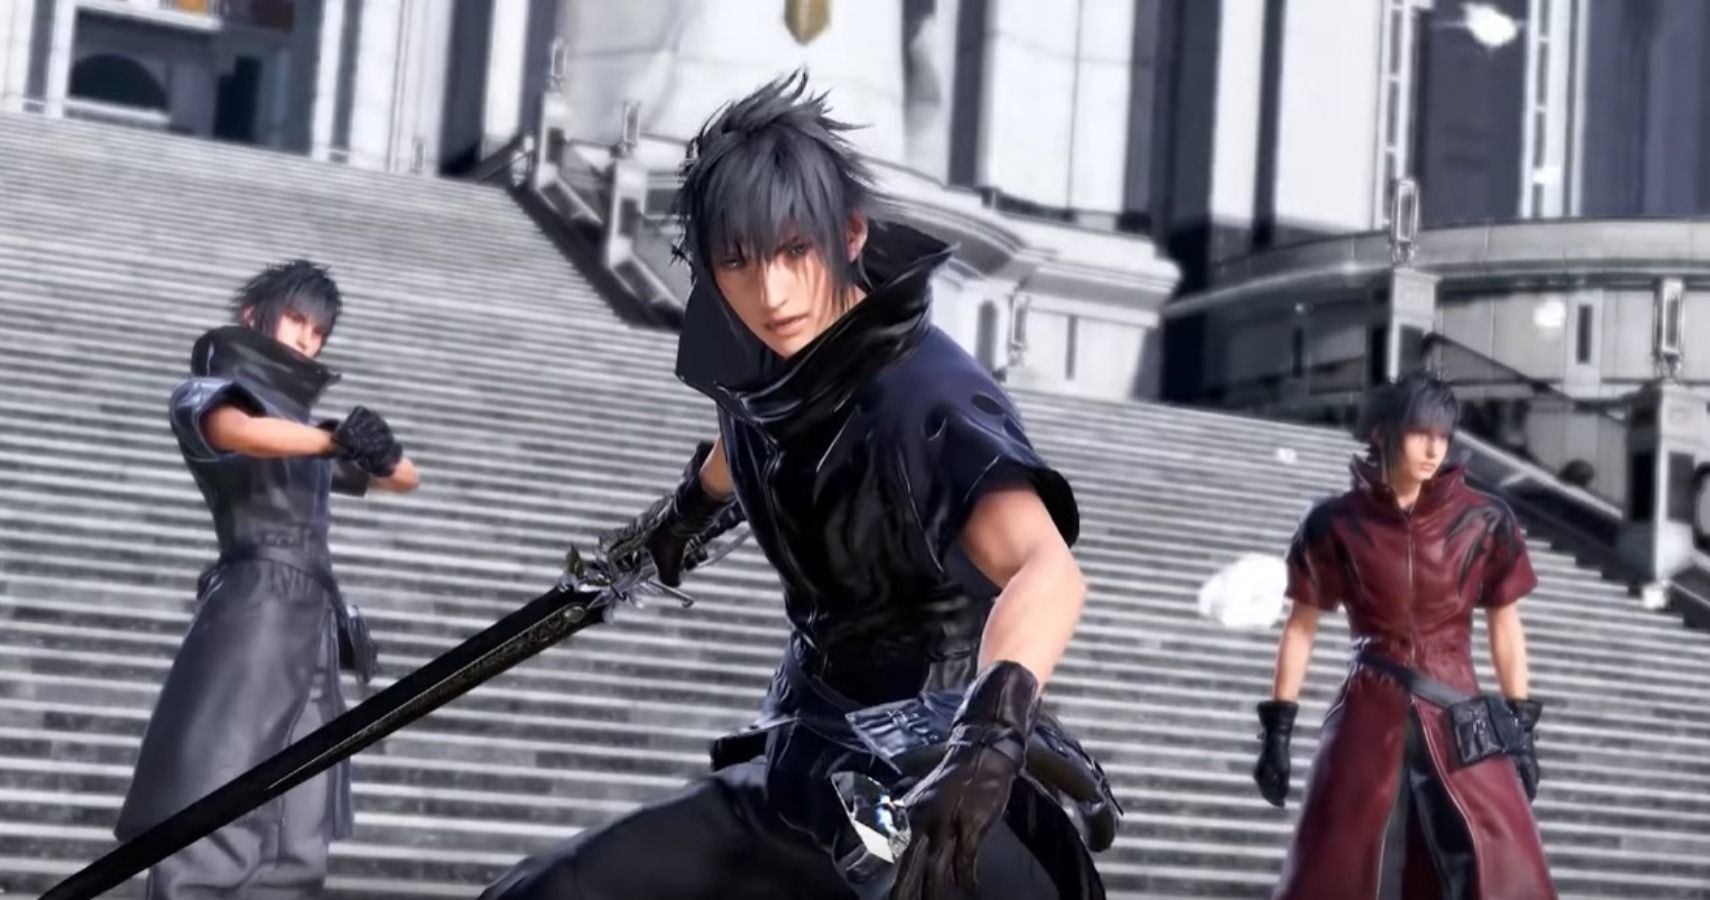 Noctis-Final-Fantasy-Versus-XIII-Outfit-Dissidia-Cover